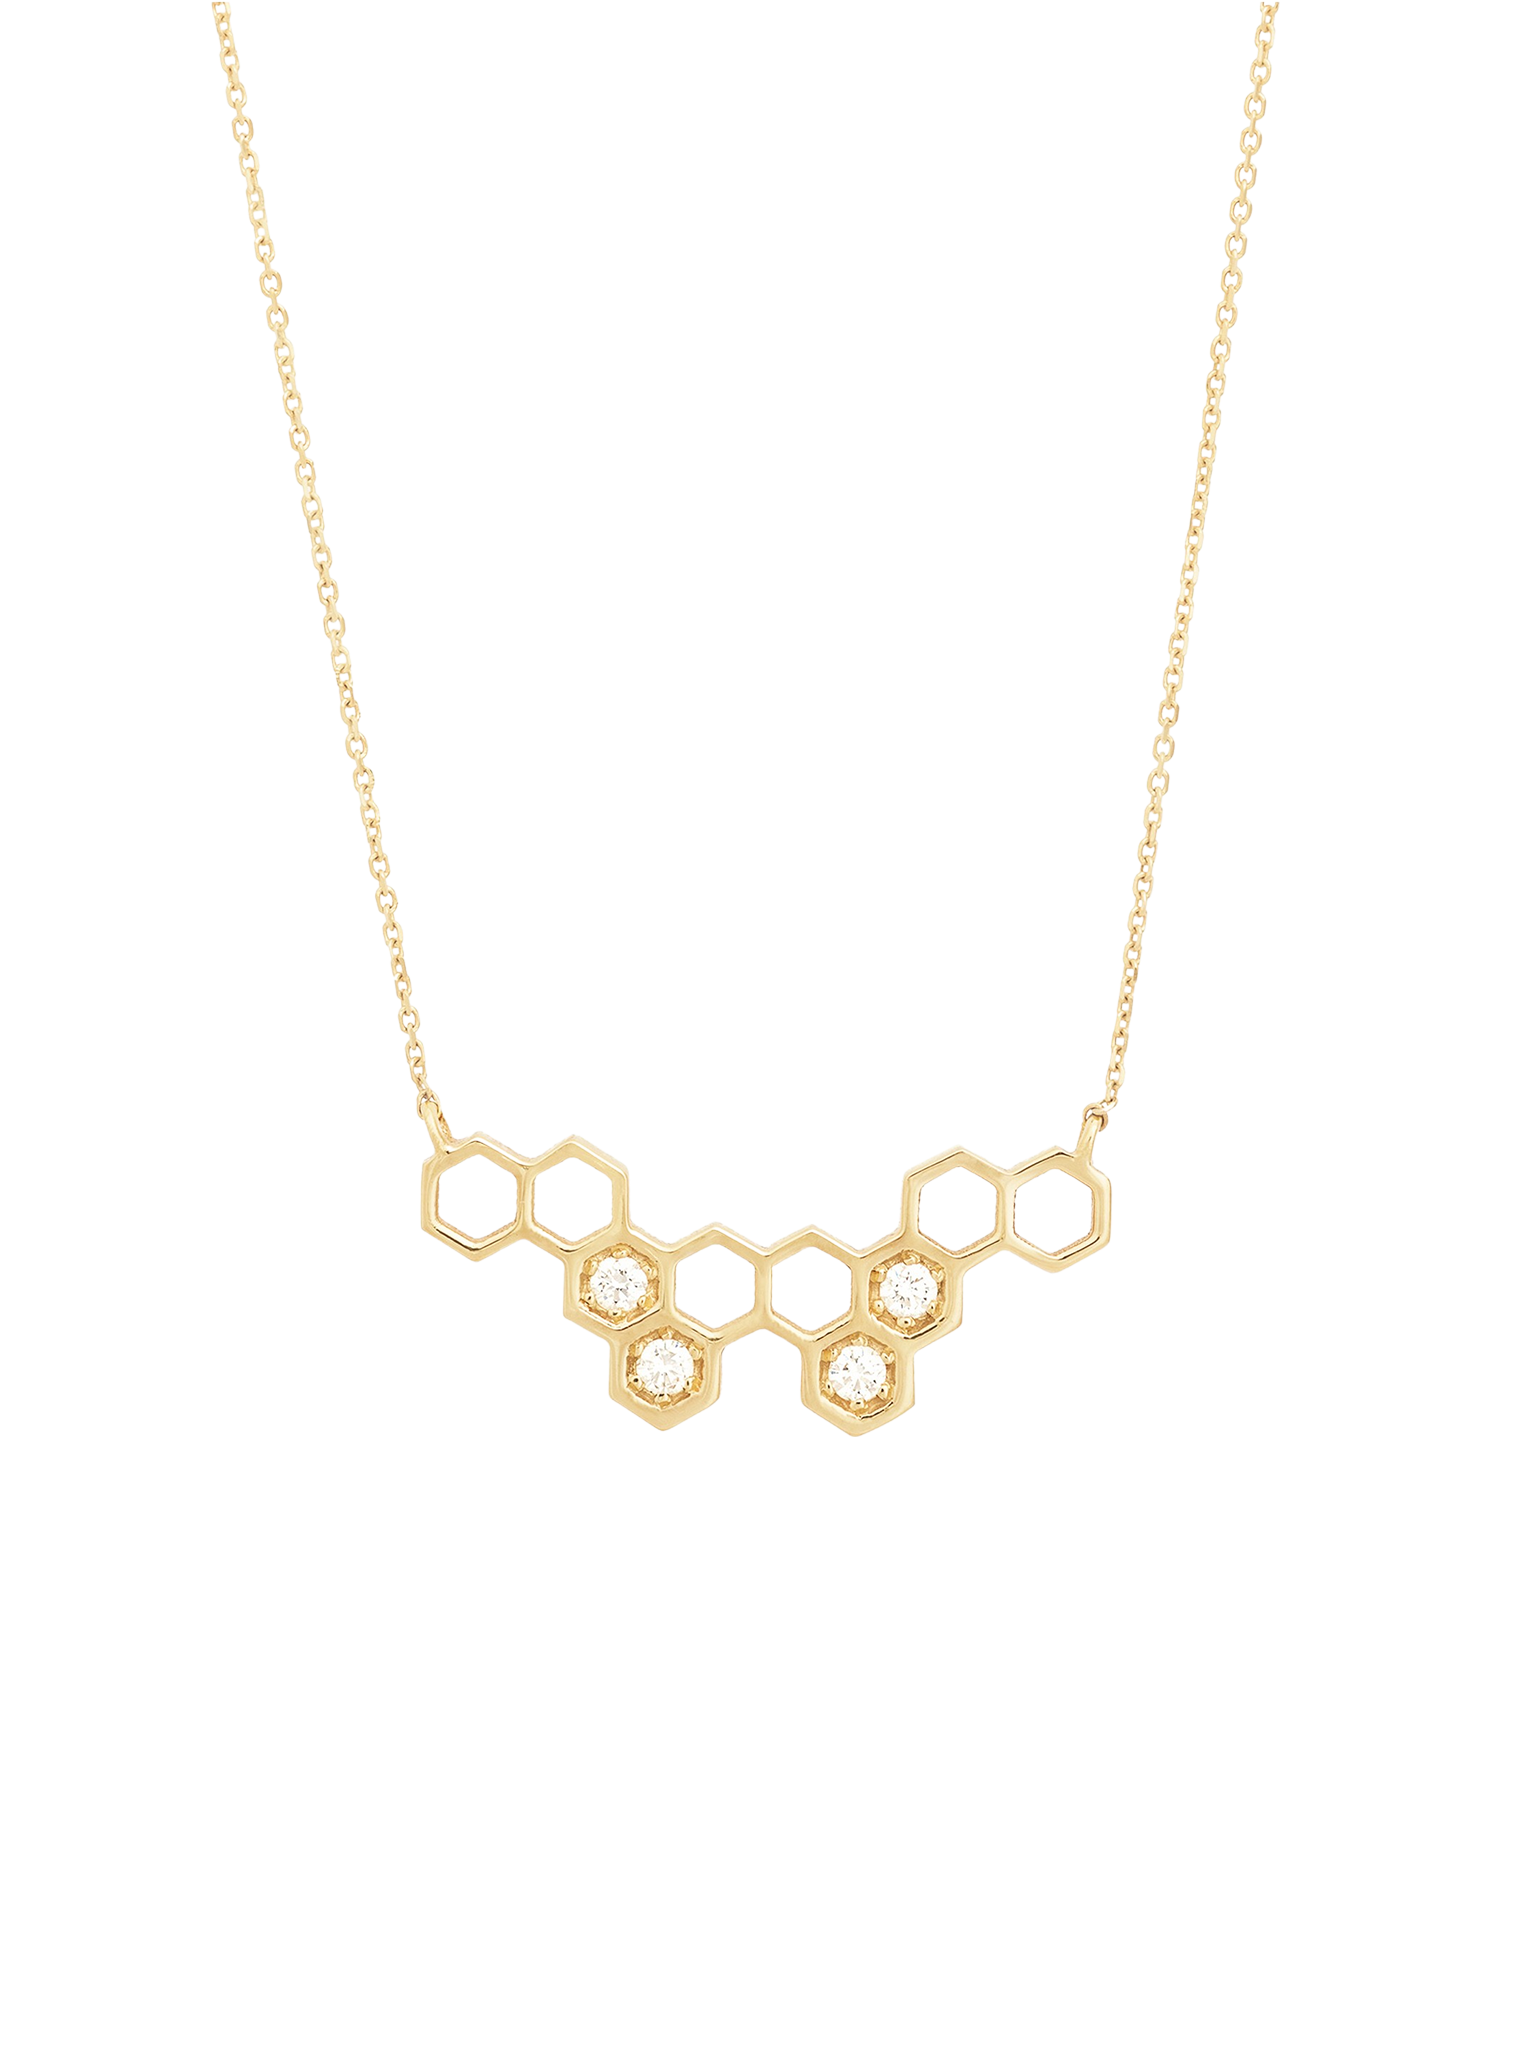 Honeycombs nectar necklace